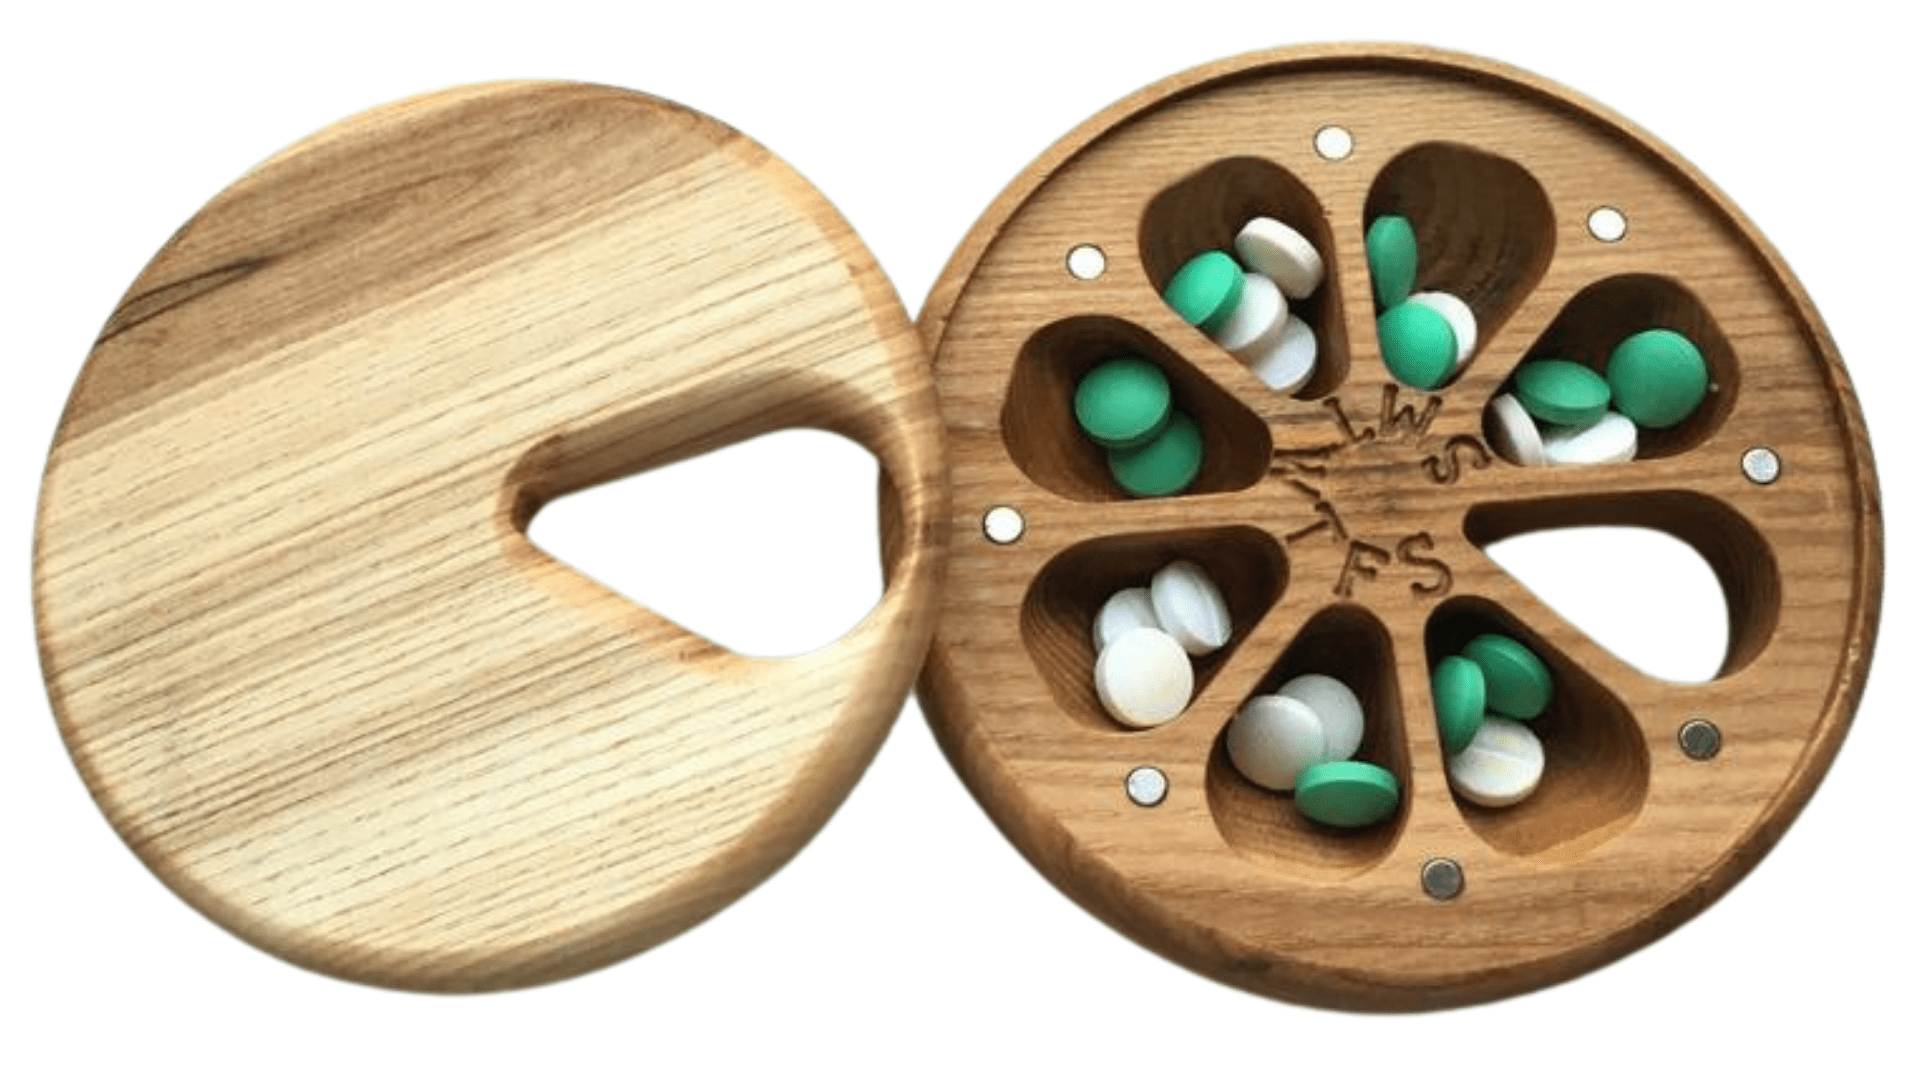 Wooden Needle Holder (Sewing) - Pill Box